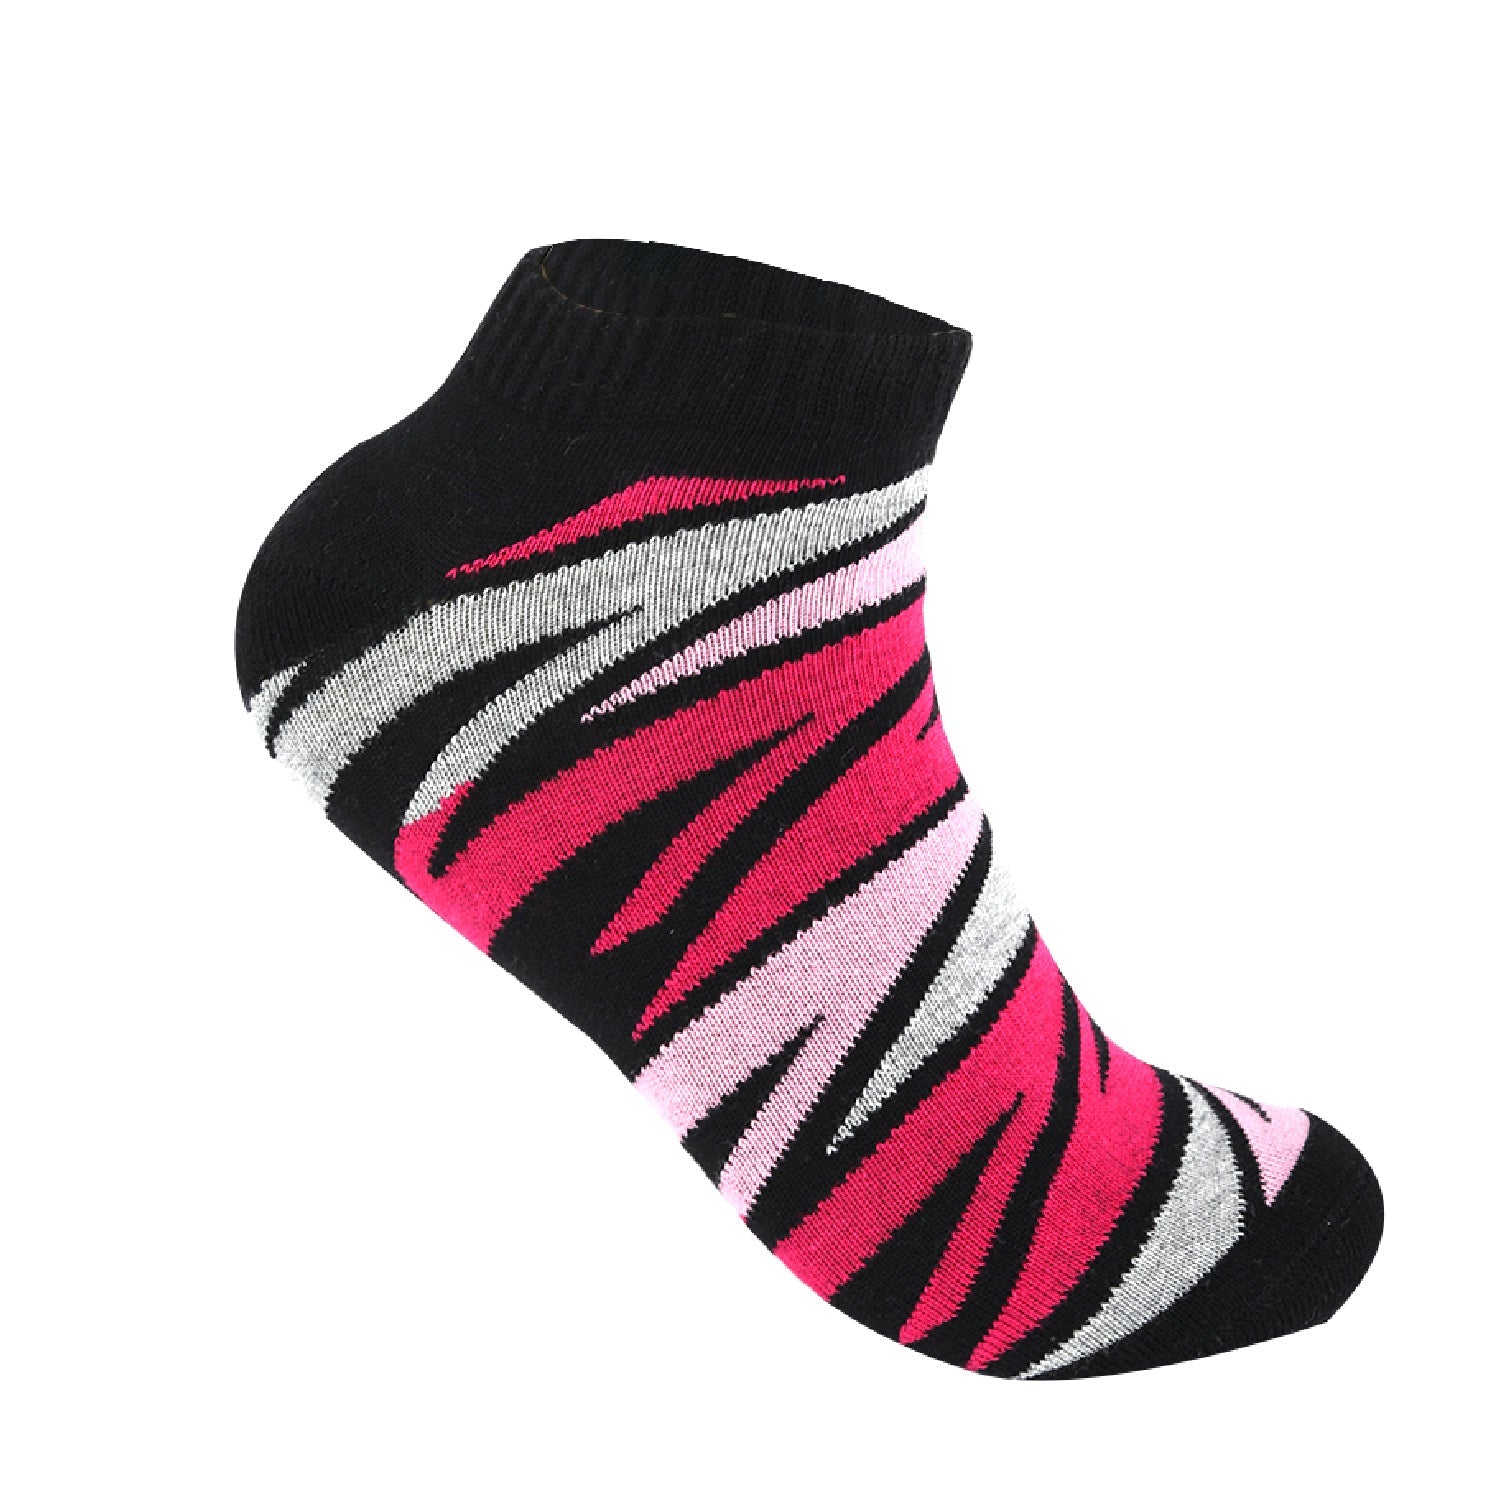 ACTIV GIRLS ANKLE SOCKS PACK*3 - COLORS A-940 Activ Abou Alaa